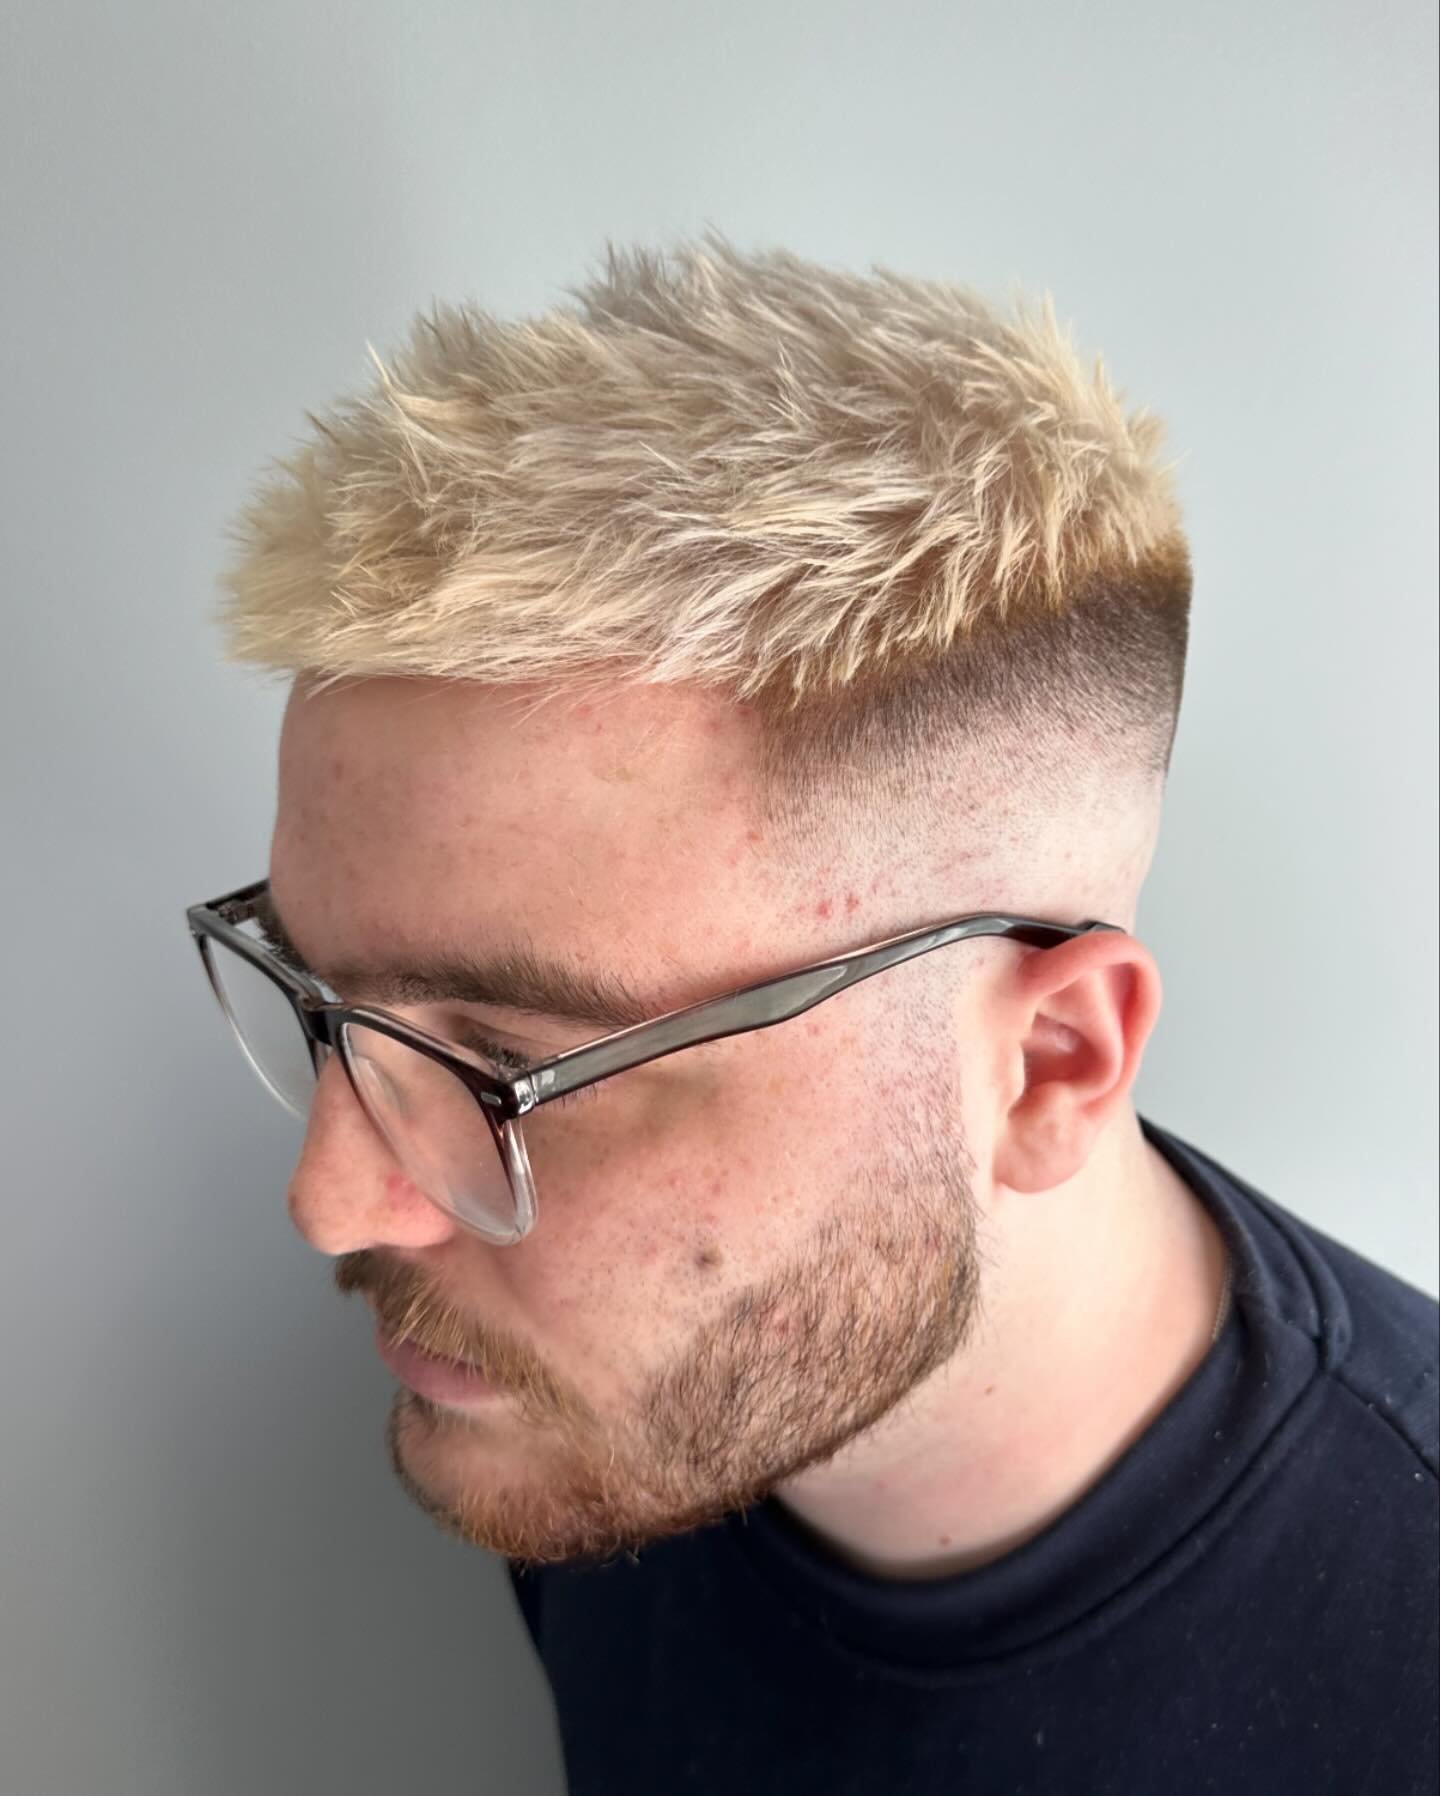 Two more weeks left! Did you know barbers can now offer color services?